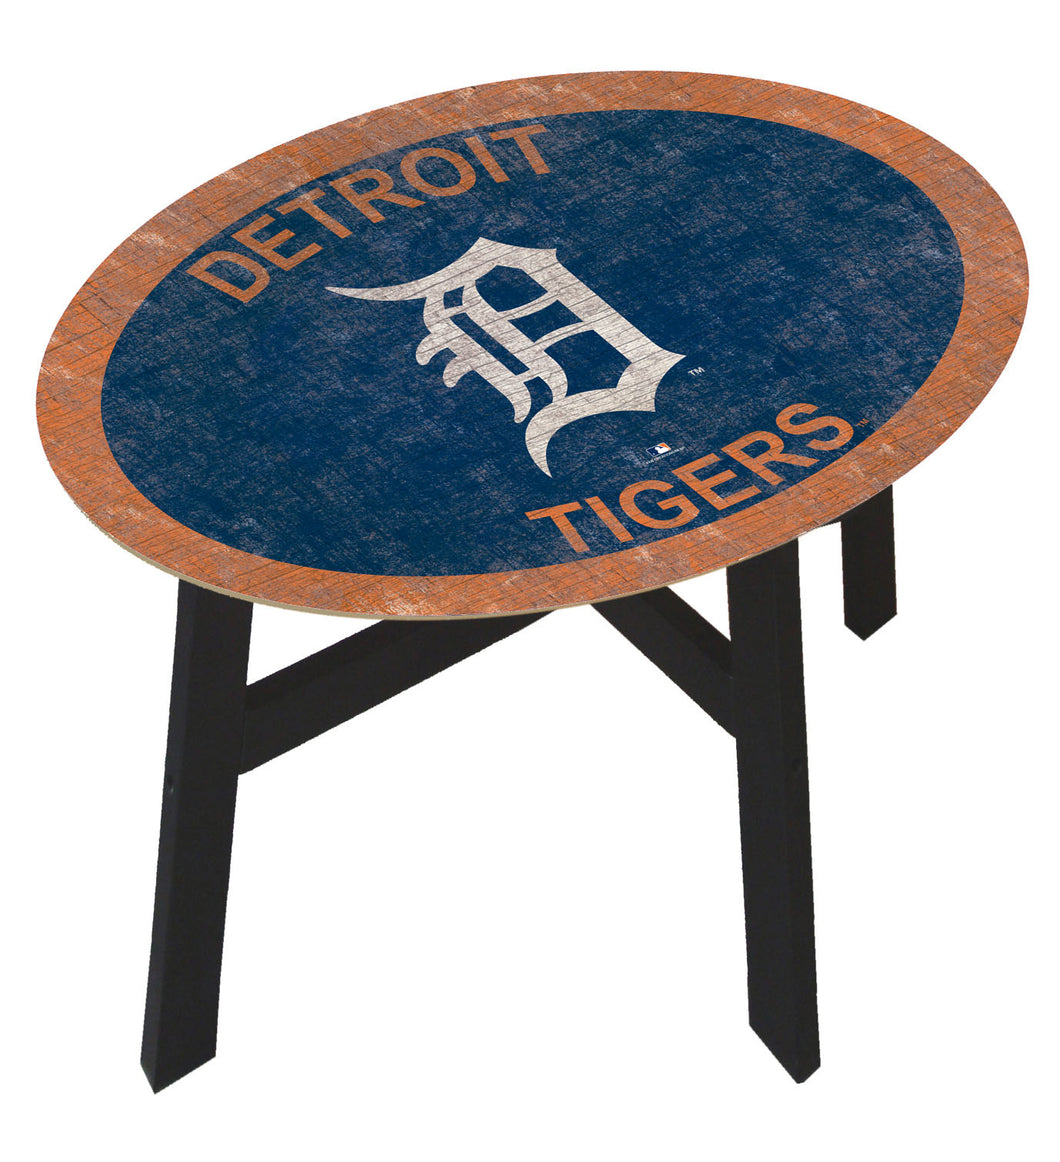 Detroit Tigers Team Color Wood Side Table